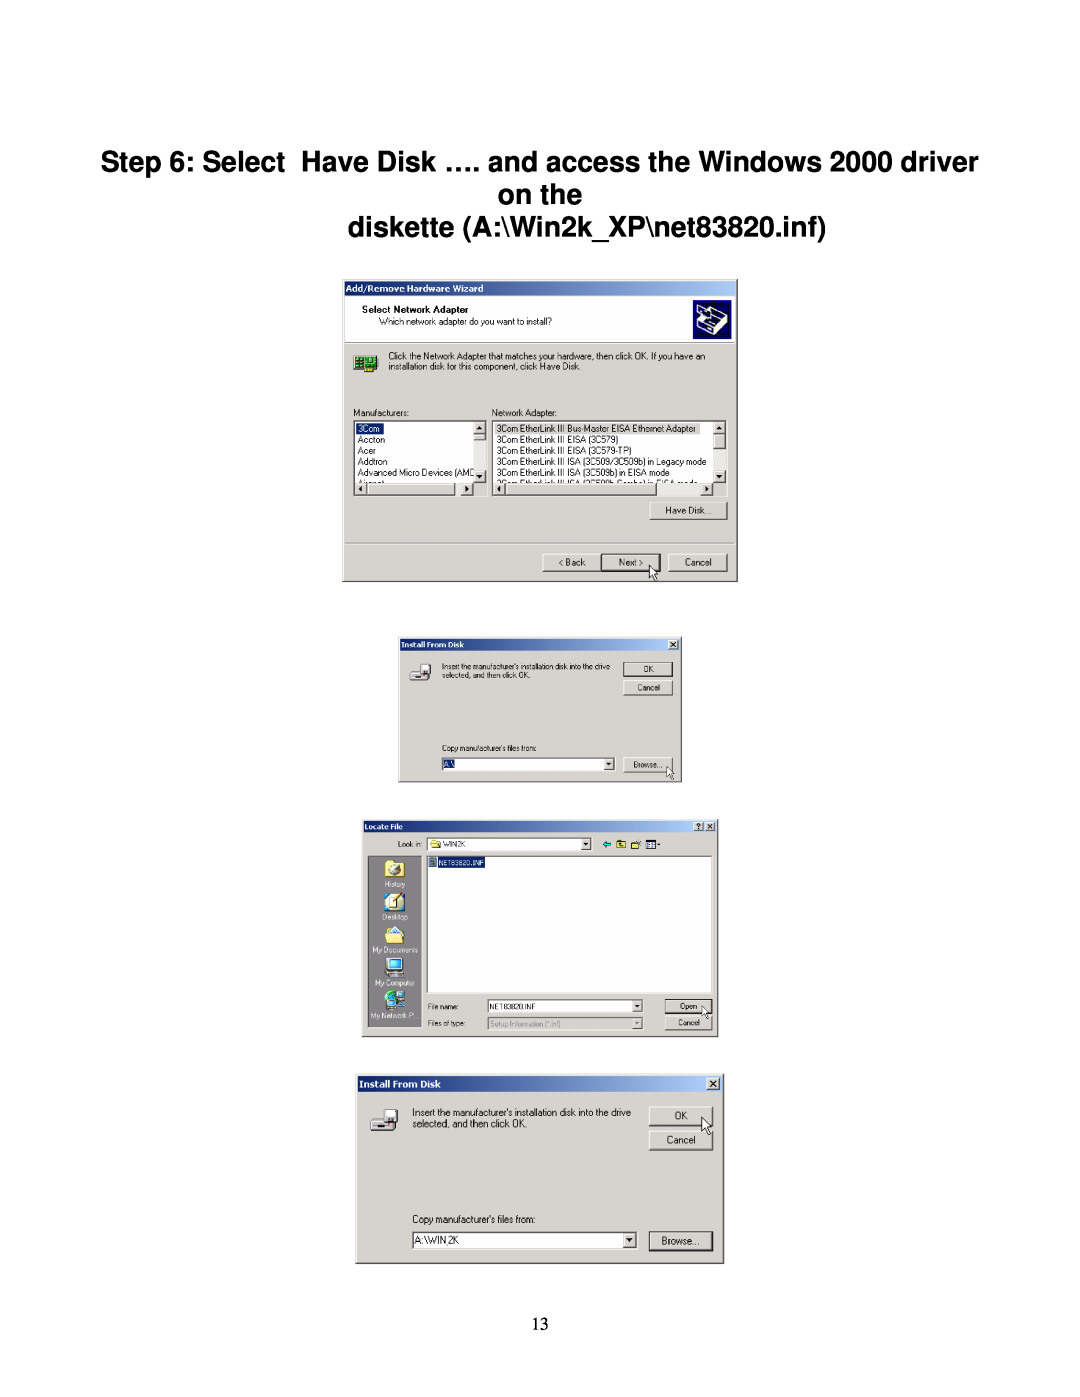 Gigabyte GE 2000-N Select Have Disk …. and access the Windows 2000 driver on the, diskette A\Win2kXP\net83820.inf 